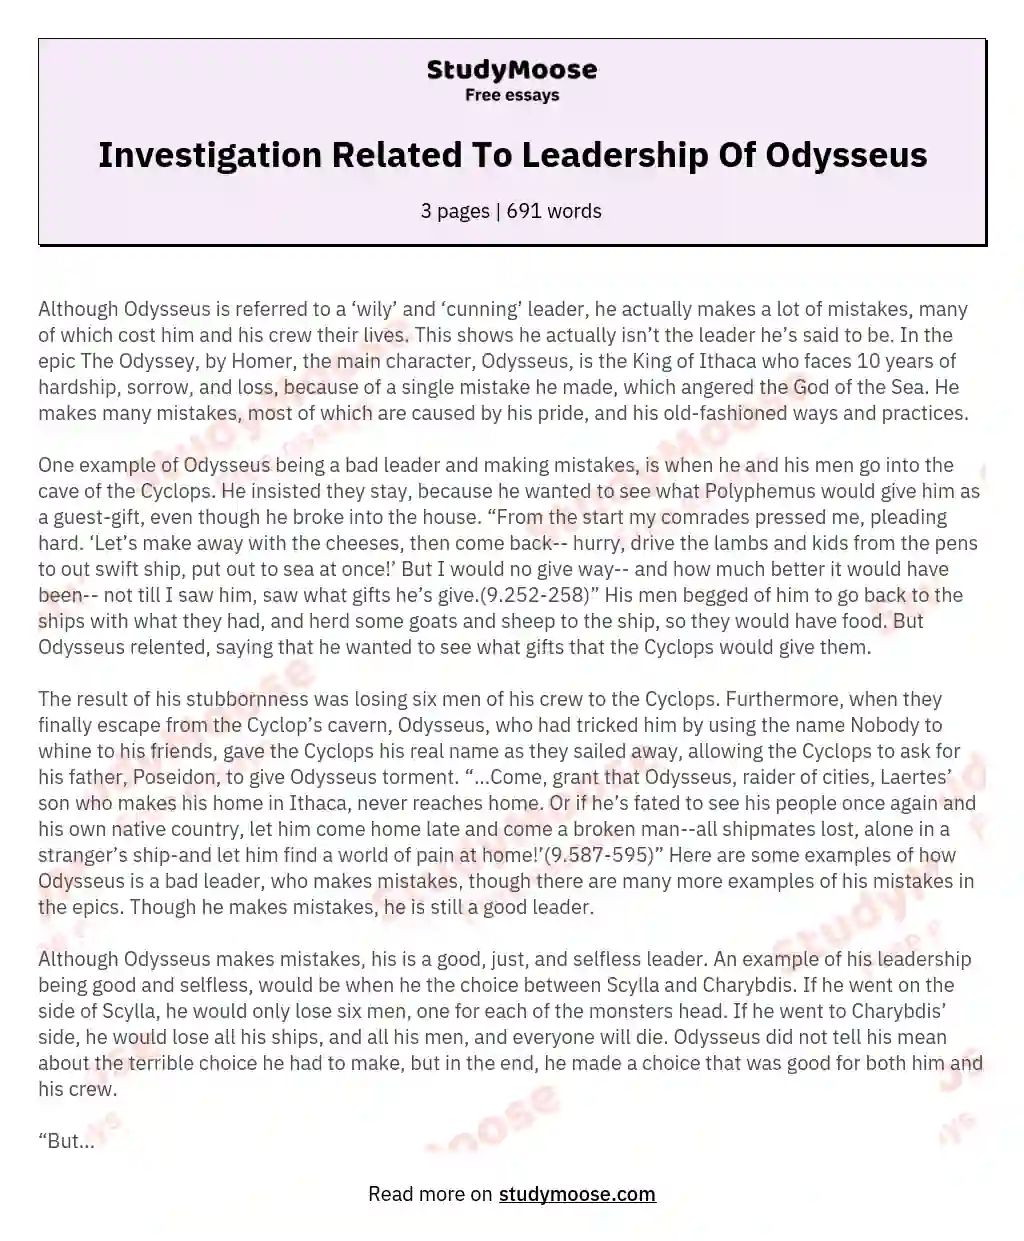 Investigation Related To Leadership Of Odysseus essay